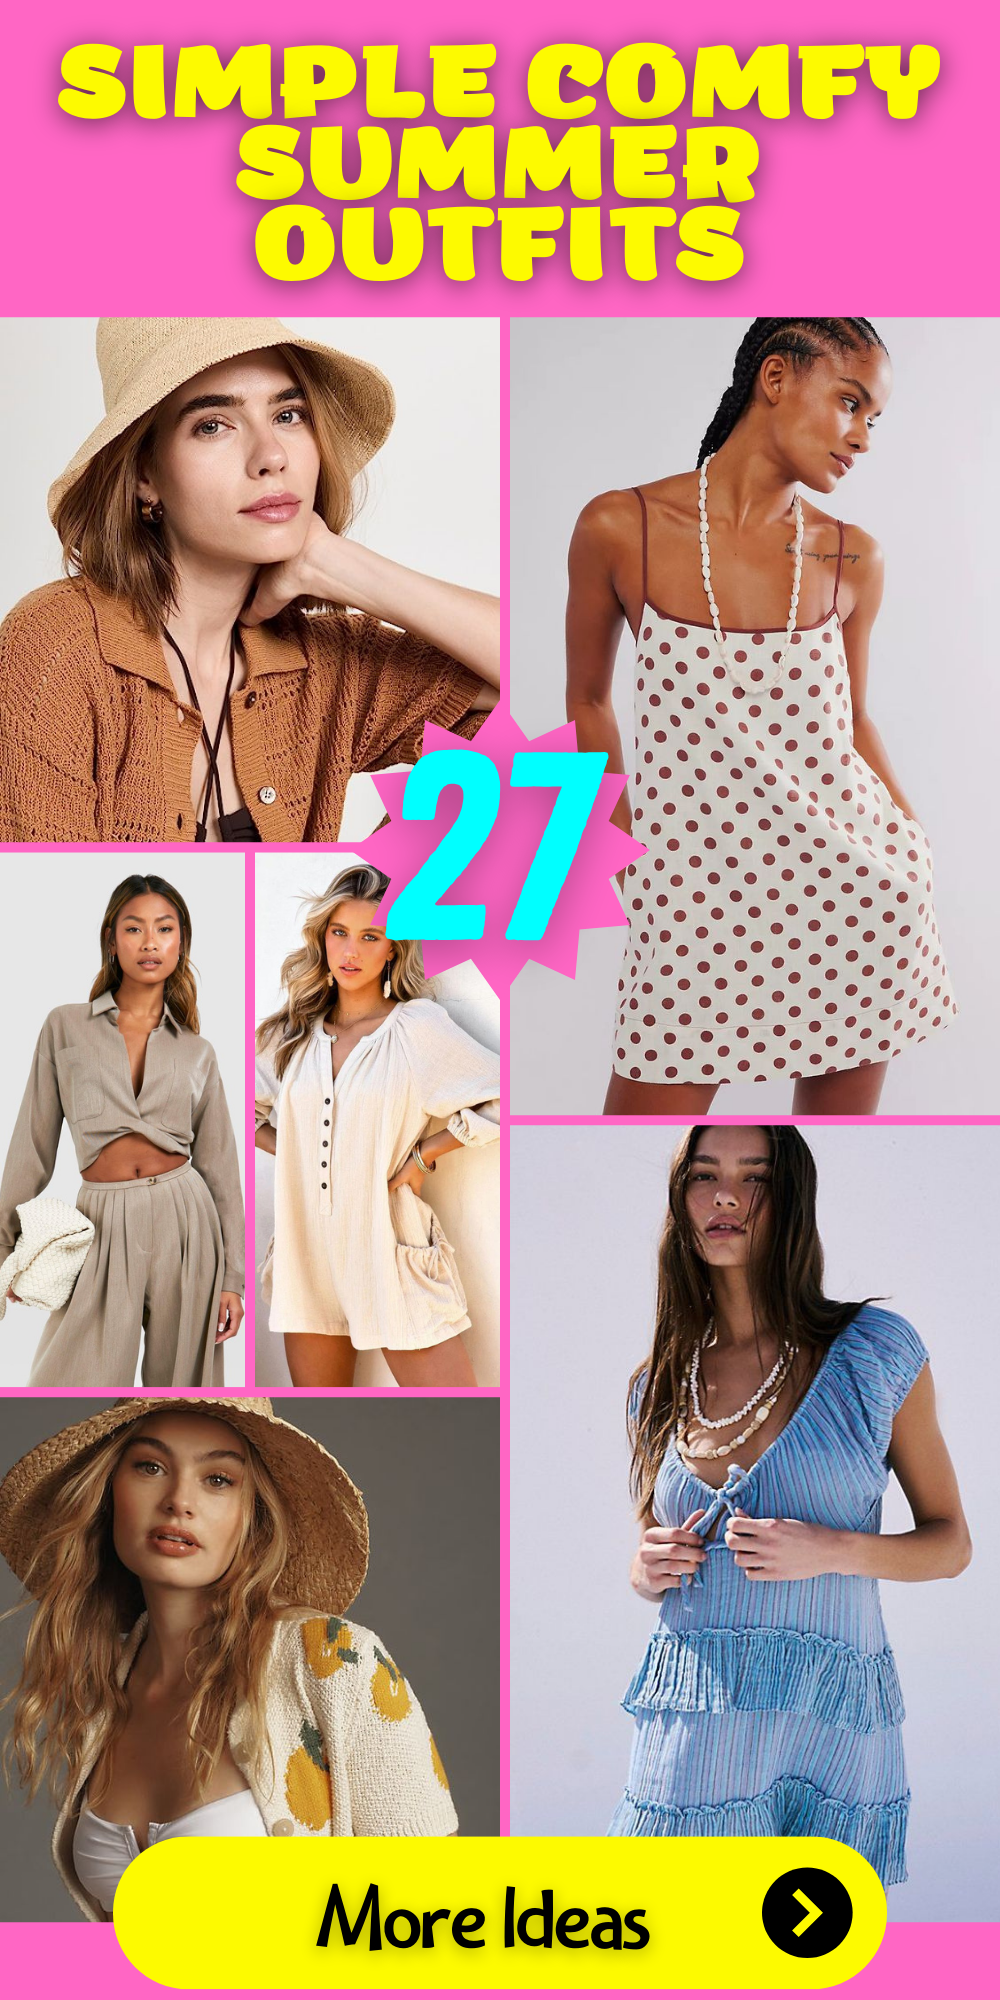 27 Simple and Comfy Summer Outfit Ideas to Beat the Heat